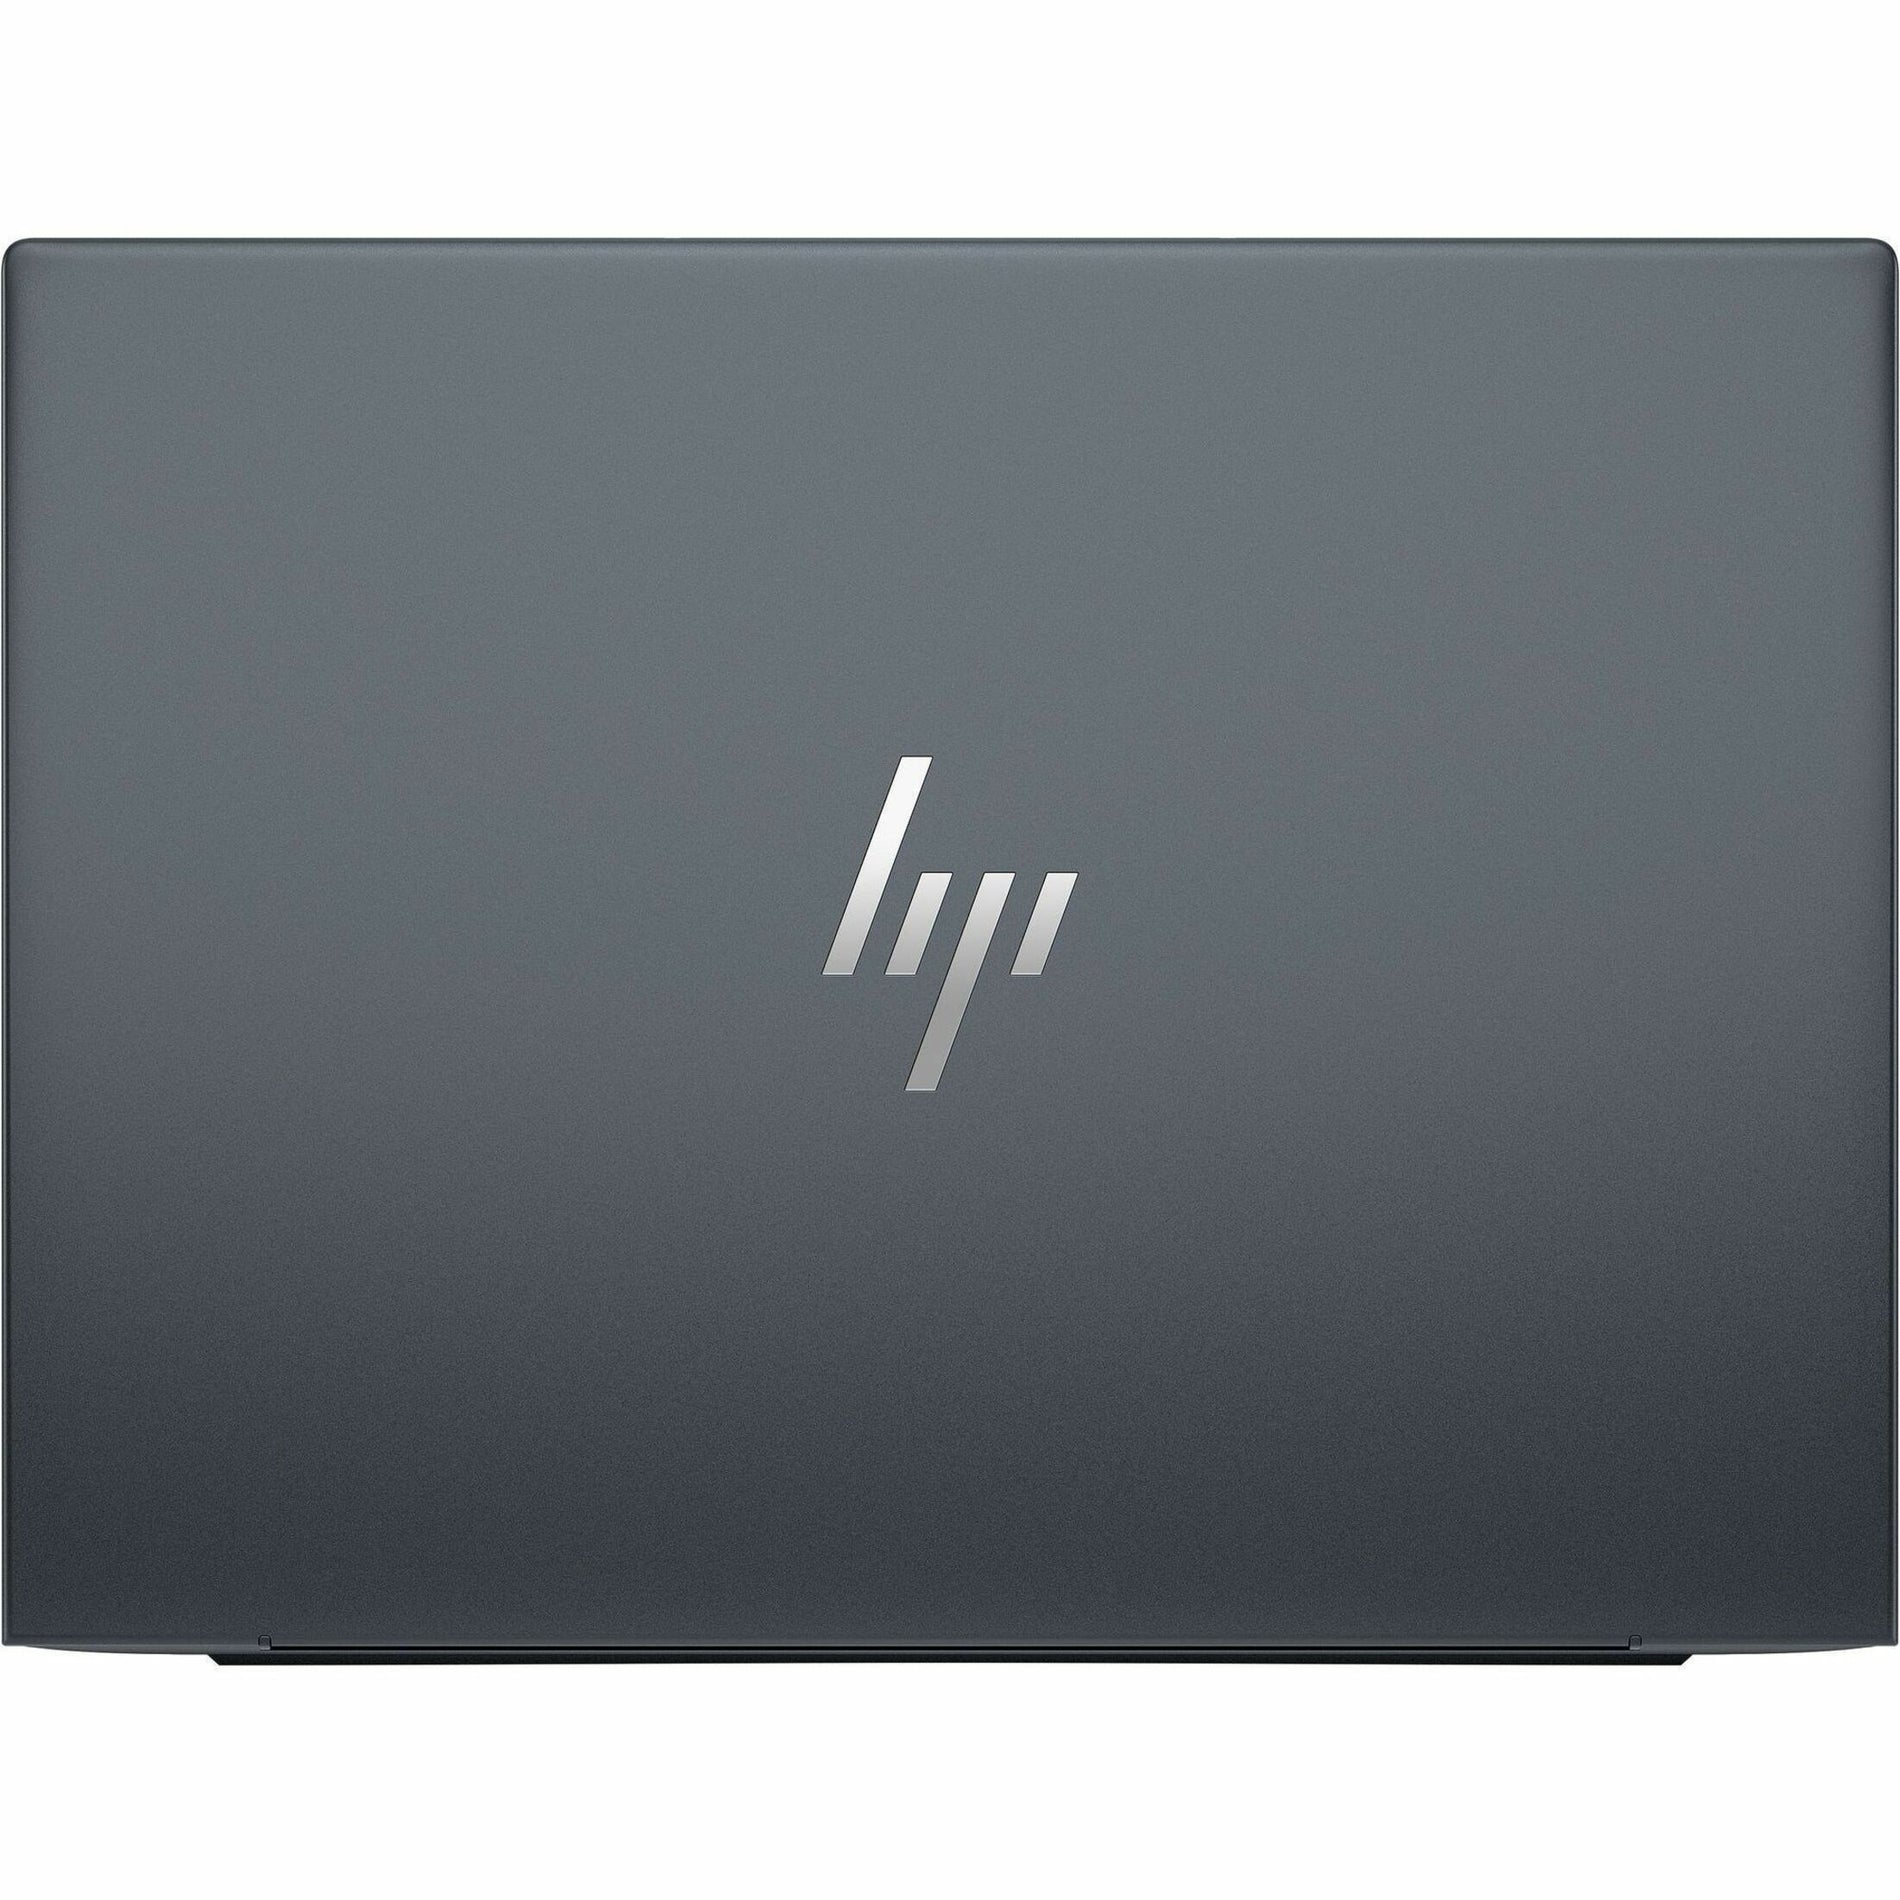 HP Dragonfly 13.5 inch G4 Notebook PC Wolf Pro Security Edition, Core i7, 16GB RAM, 512GB SSD, Windows 11 Pro